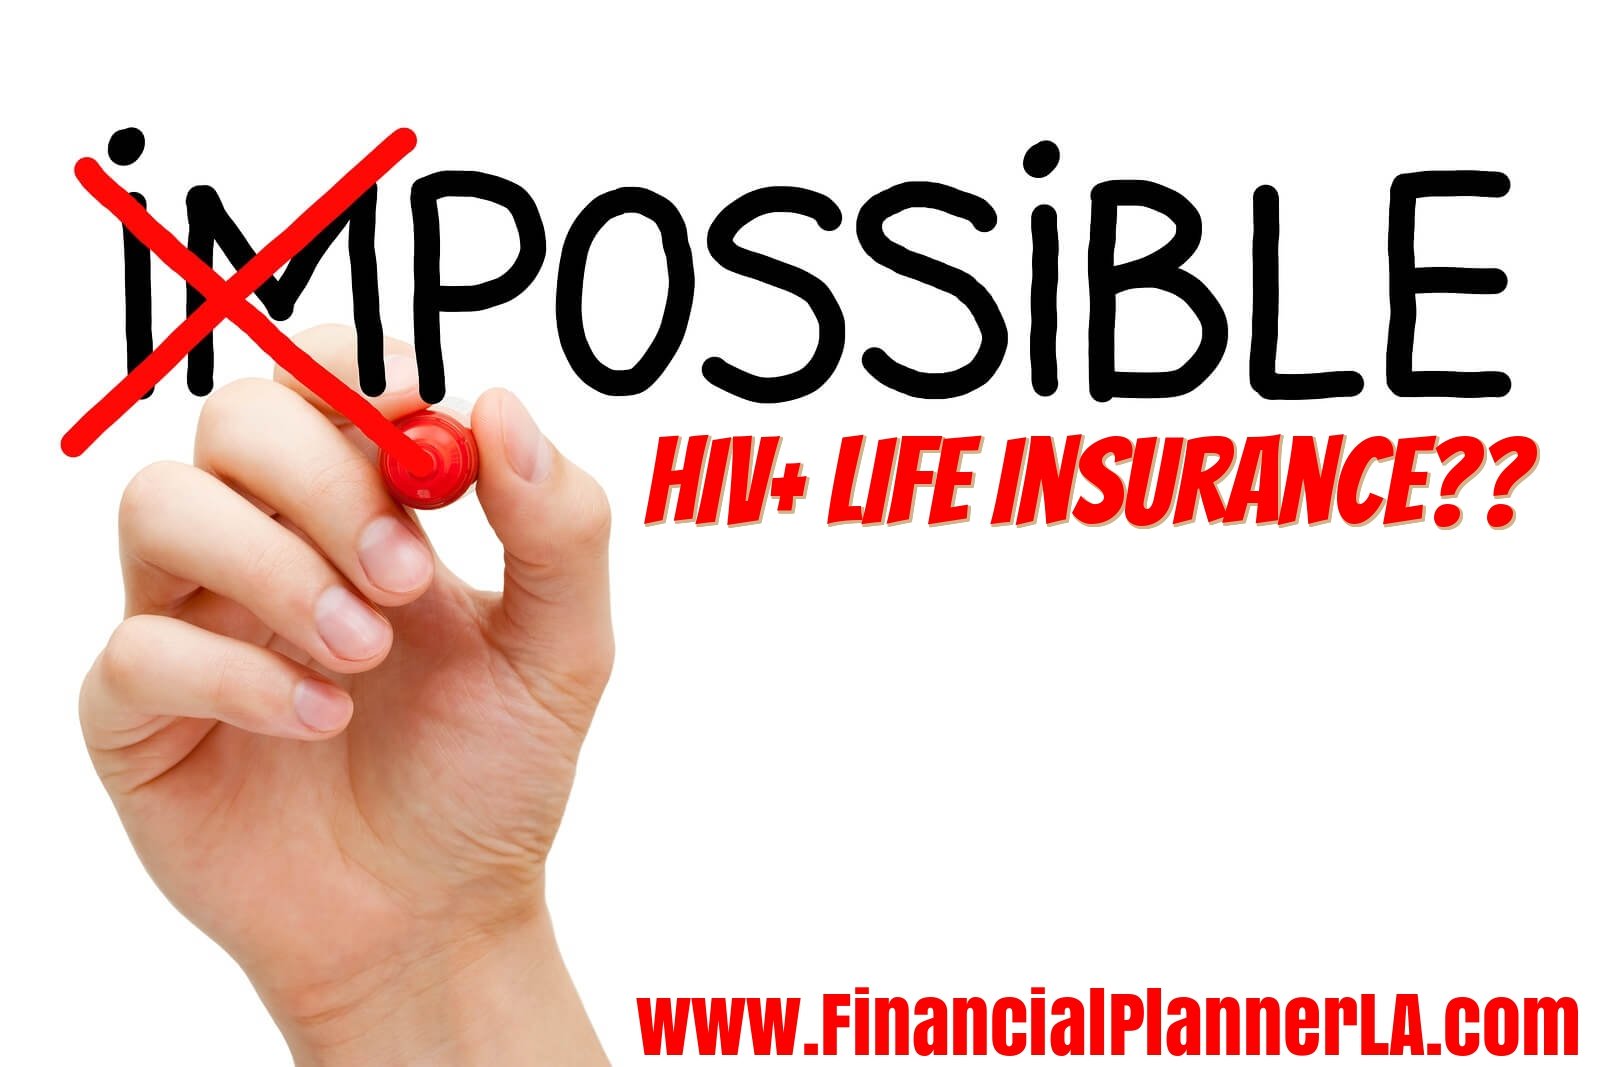 Life Insurance for the HIV Positive